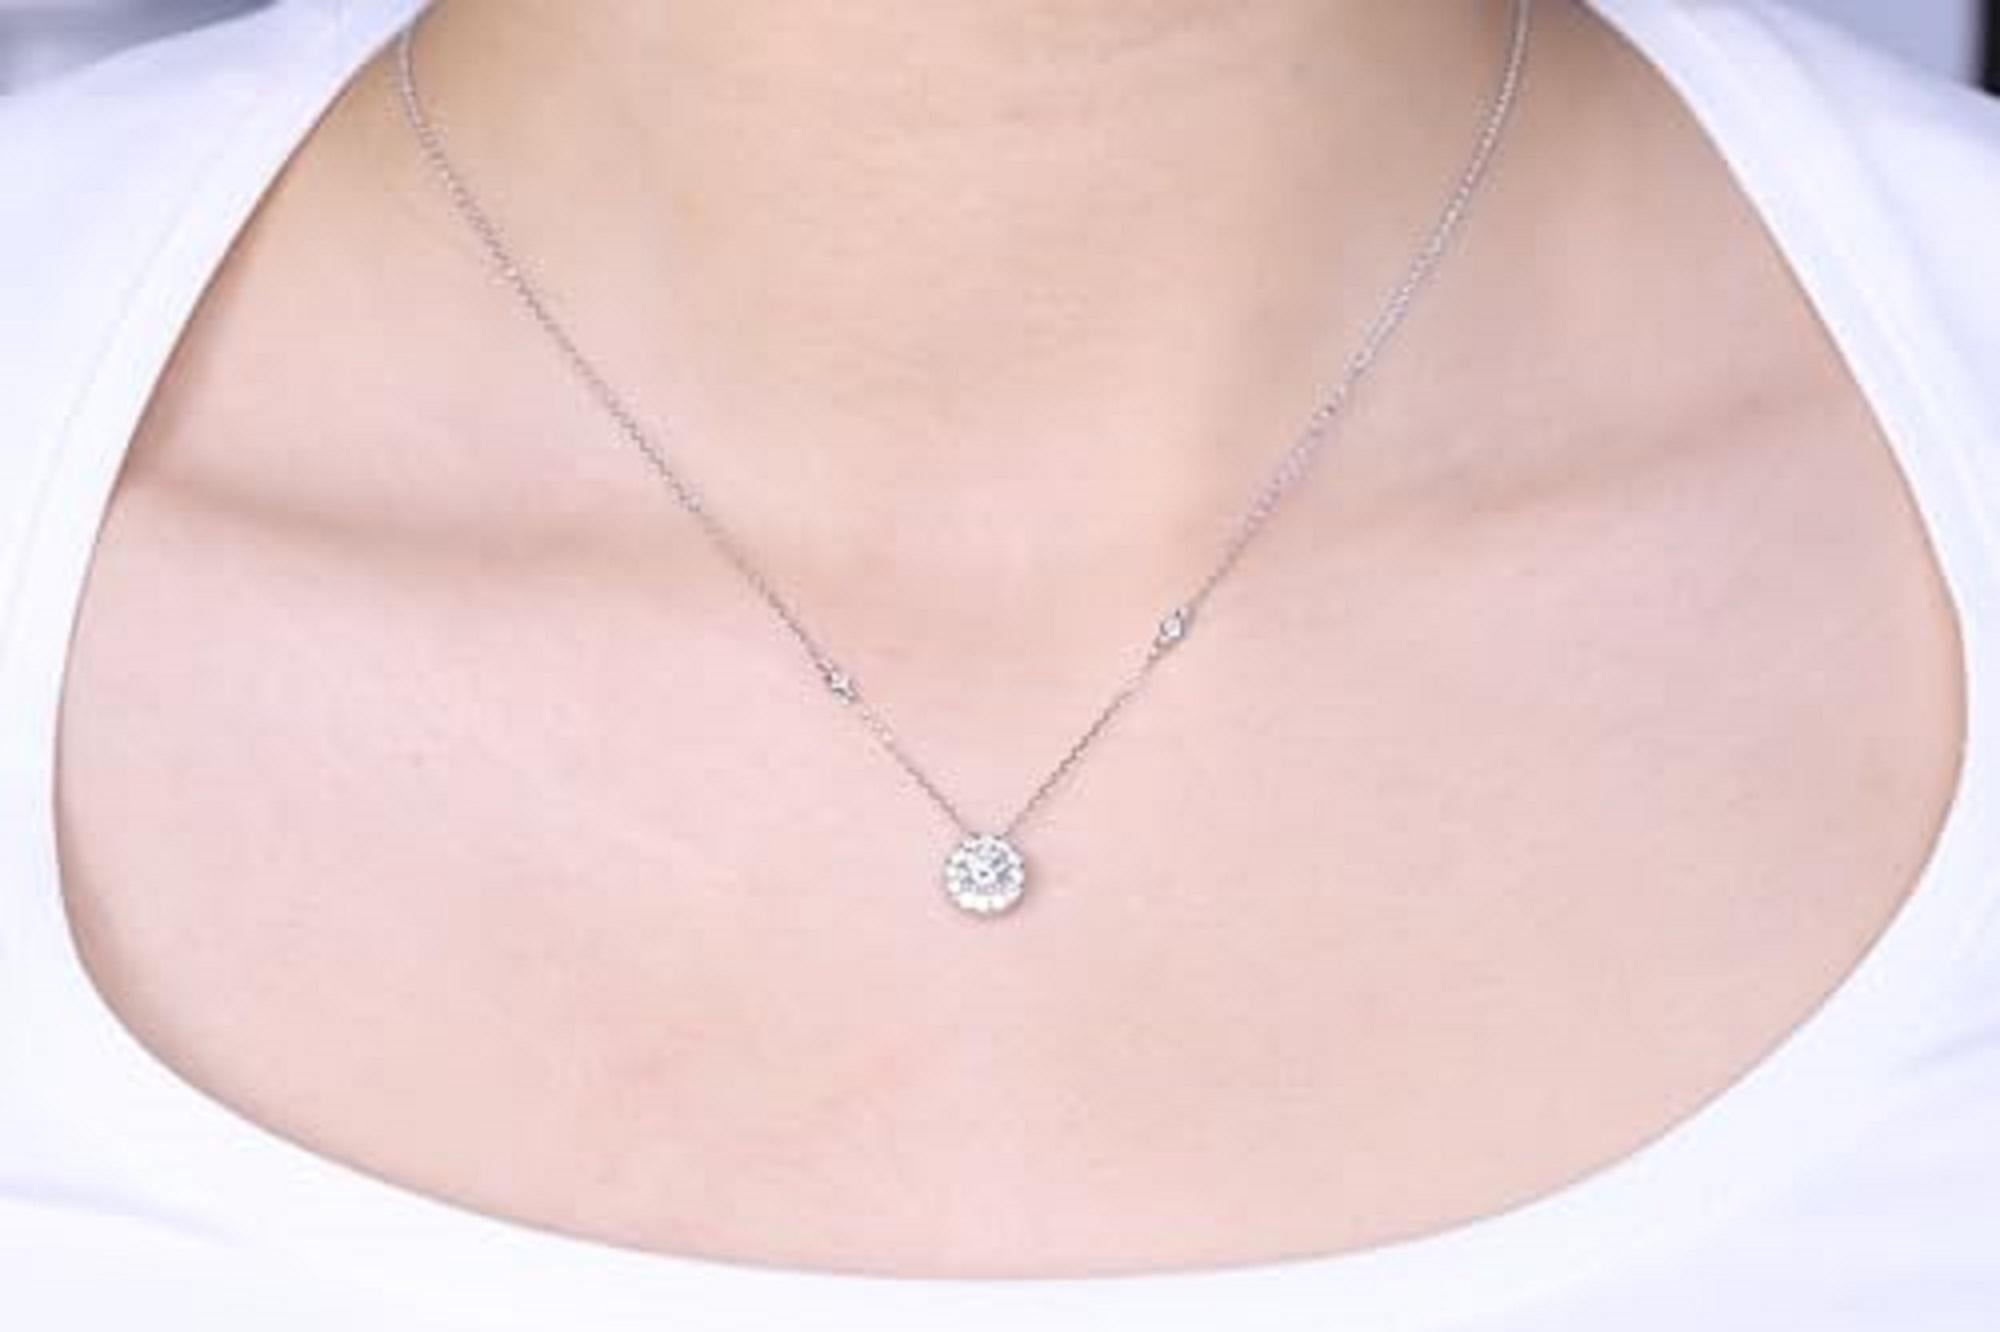 Decorate yourself in elegance with this Pendant is crafted from 14-karat White Gold by Gin & Grace. This Pendant is Round-cut White Diamond (13 Pcs) 0.79 Carat. This Pendant is weight 2.33 grams. This delicate Pendant is polished to a high finish